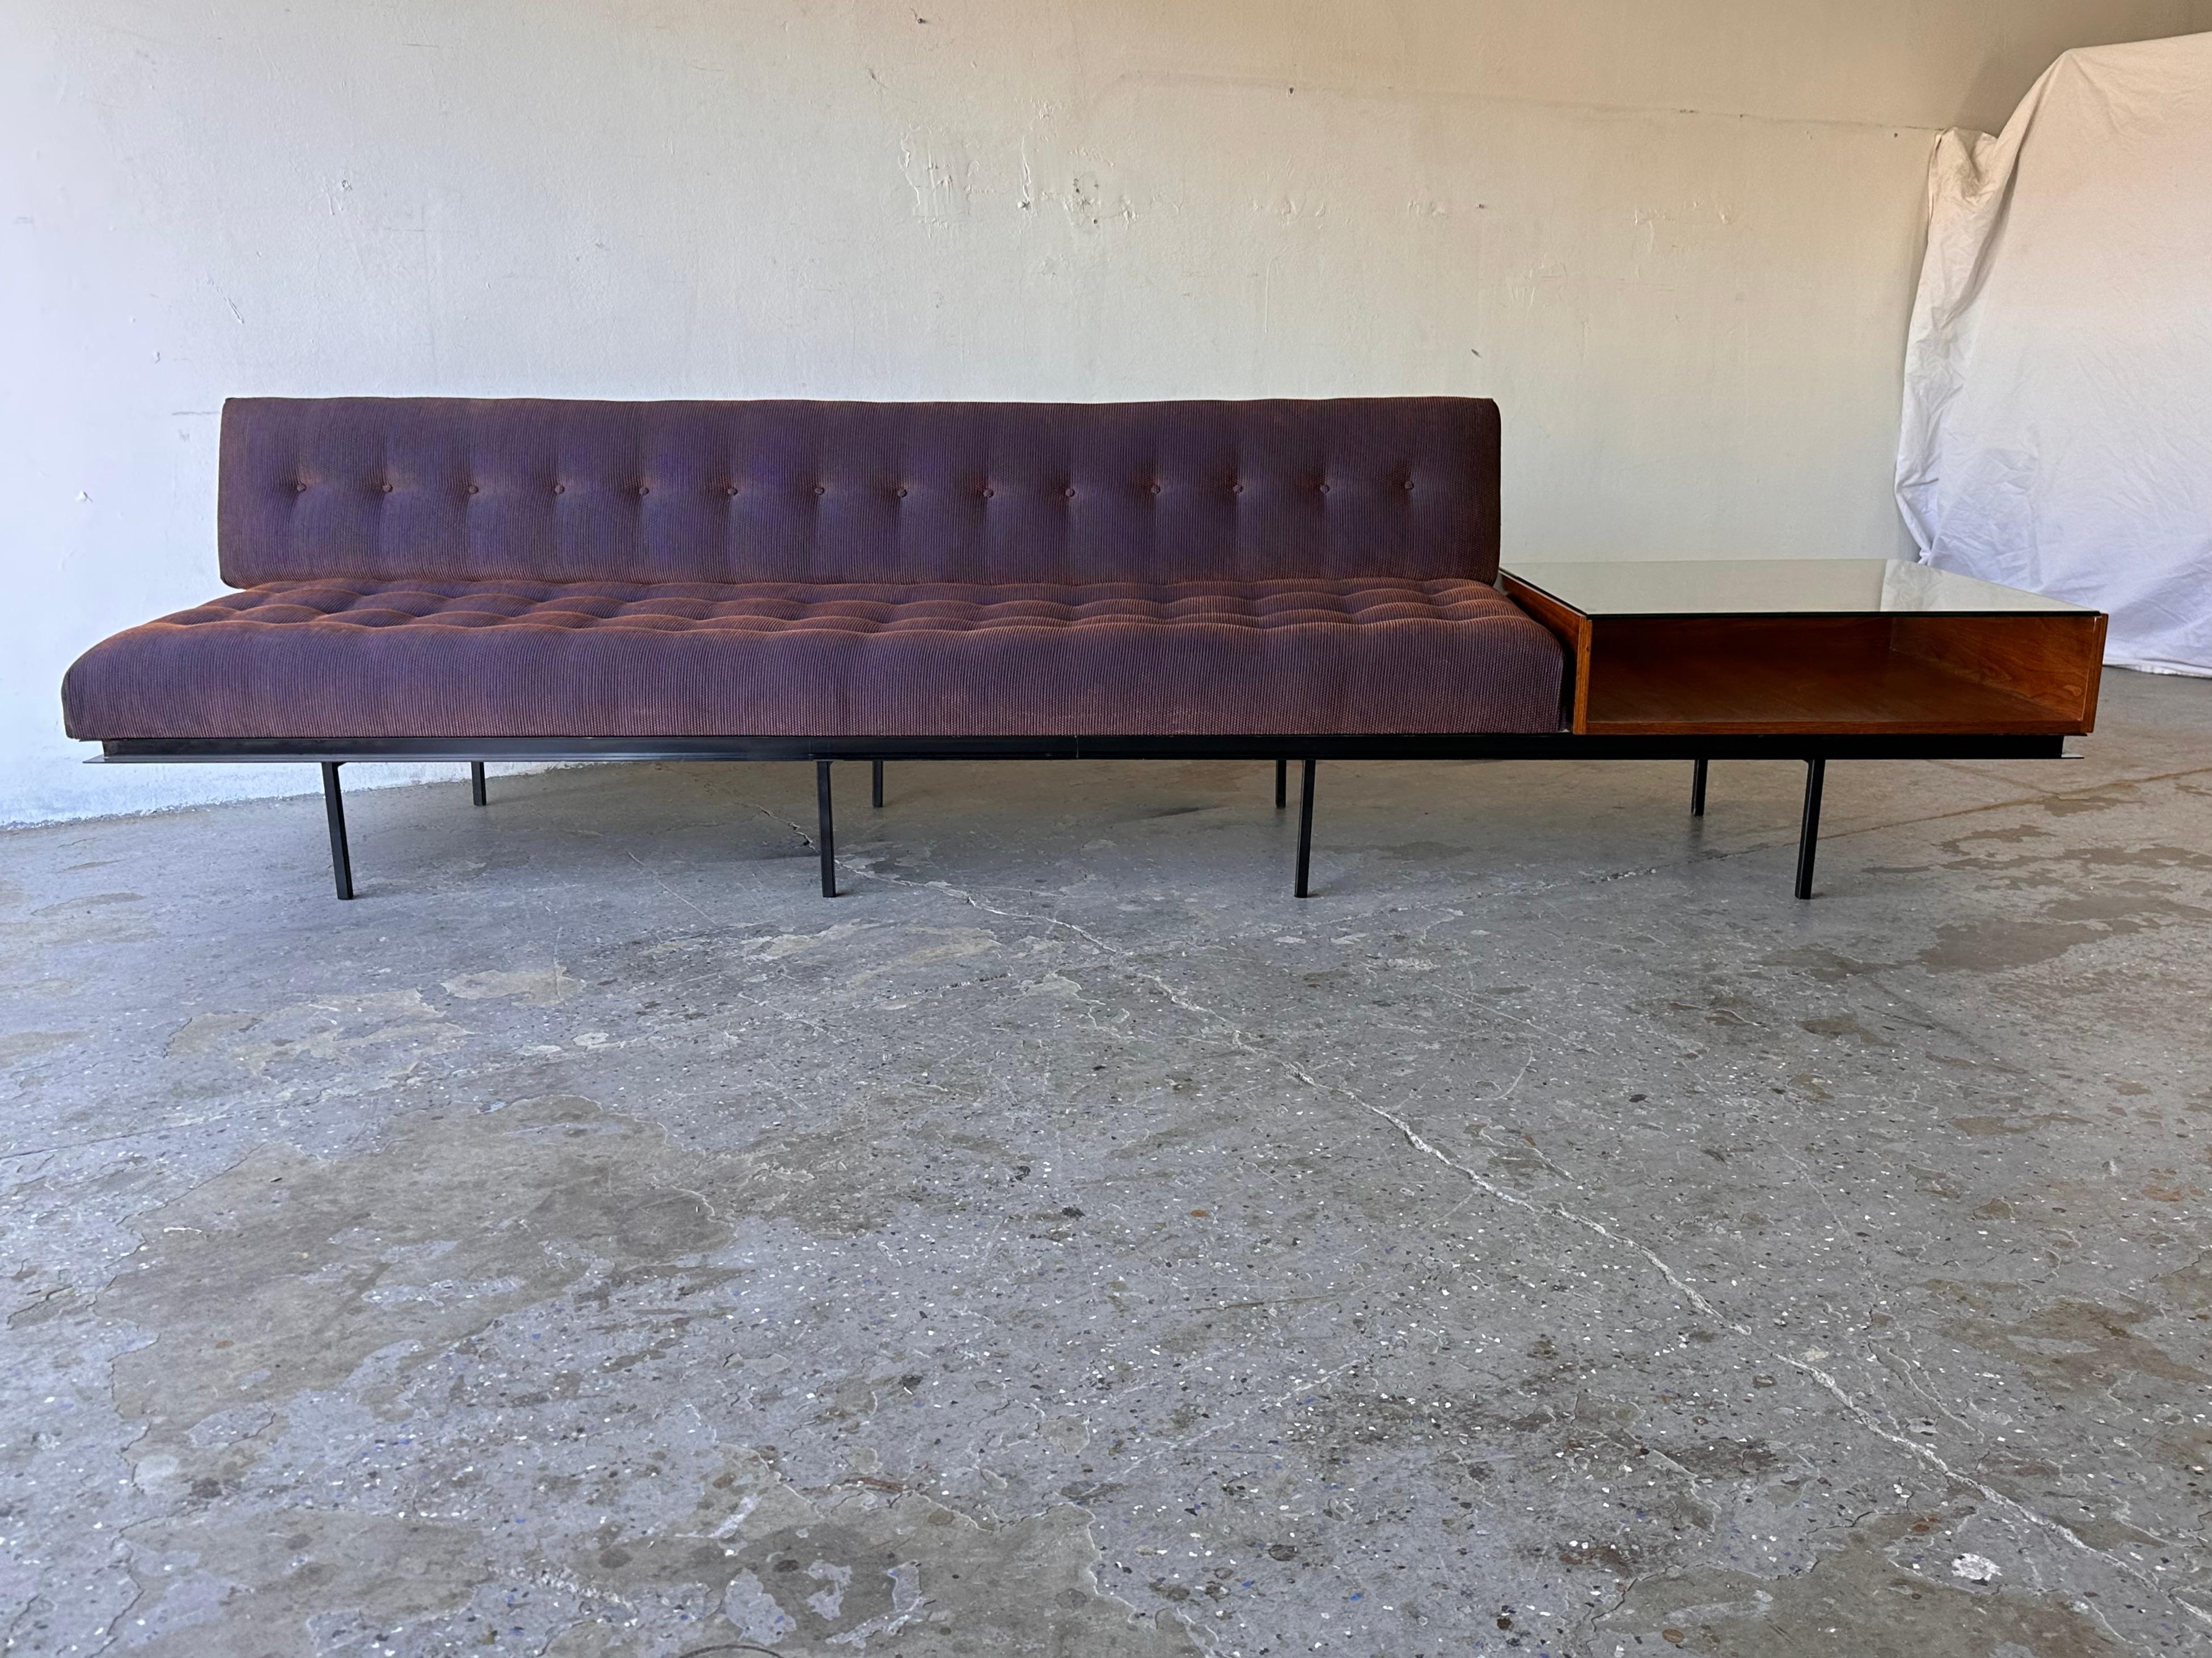 Authentic early sofa and end table designed by Florence Knoll in the mid 1950s. It features a  steel frame with eight square, tubular legs and an attached walnut table with glass top. The Iridescent fabric has shades of purple and is not  original..